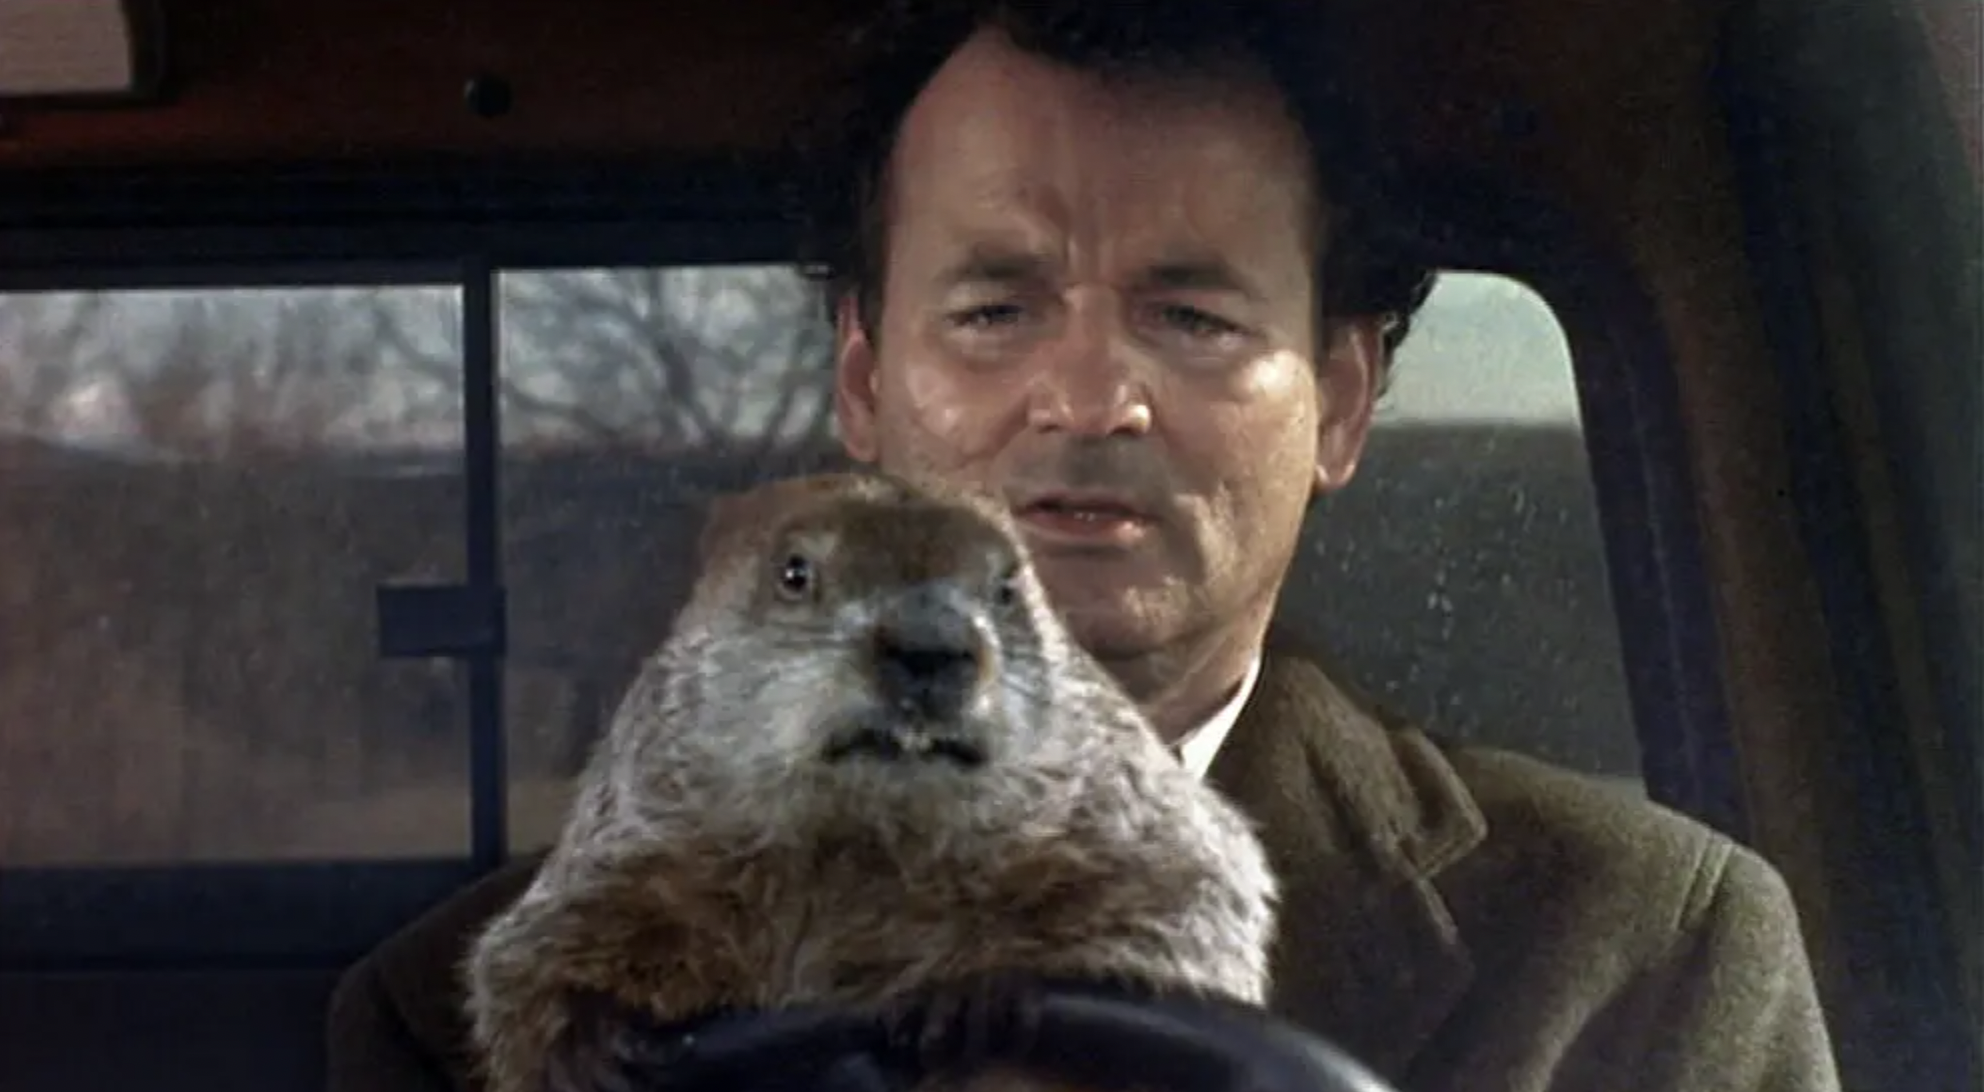 Celebrate Groundhog Day with the Bill Murray Classic Film and Punxsutawney Phil!